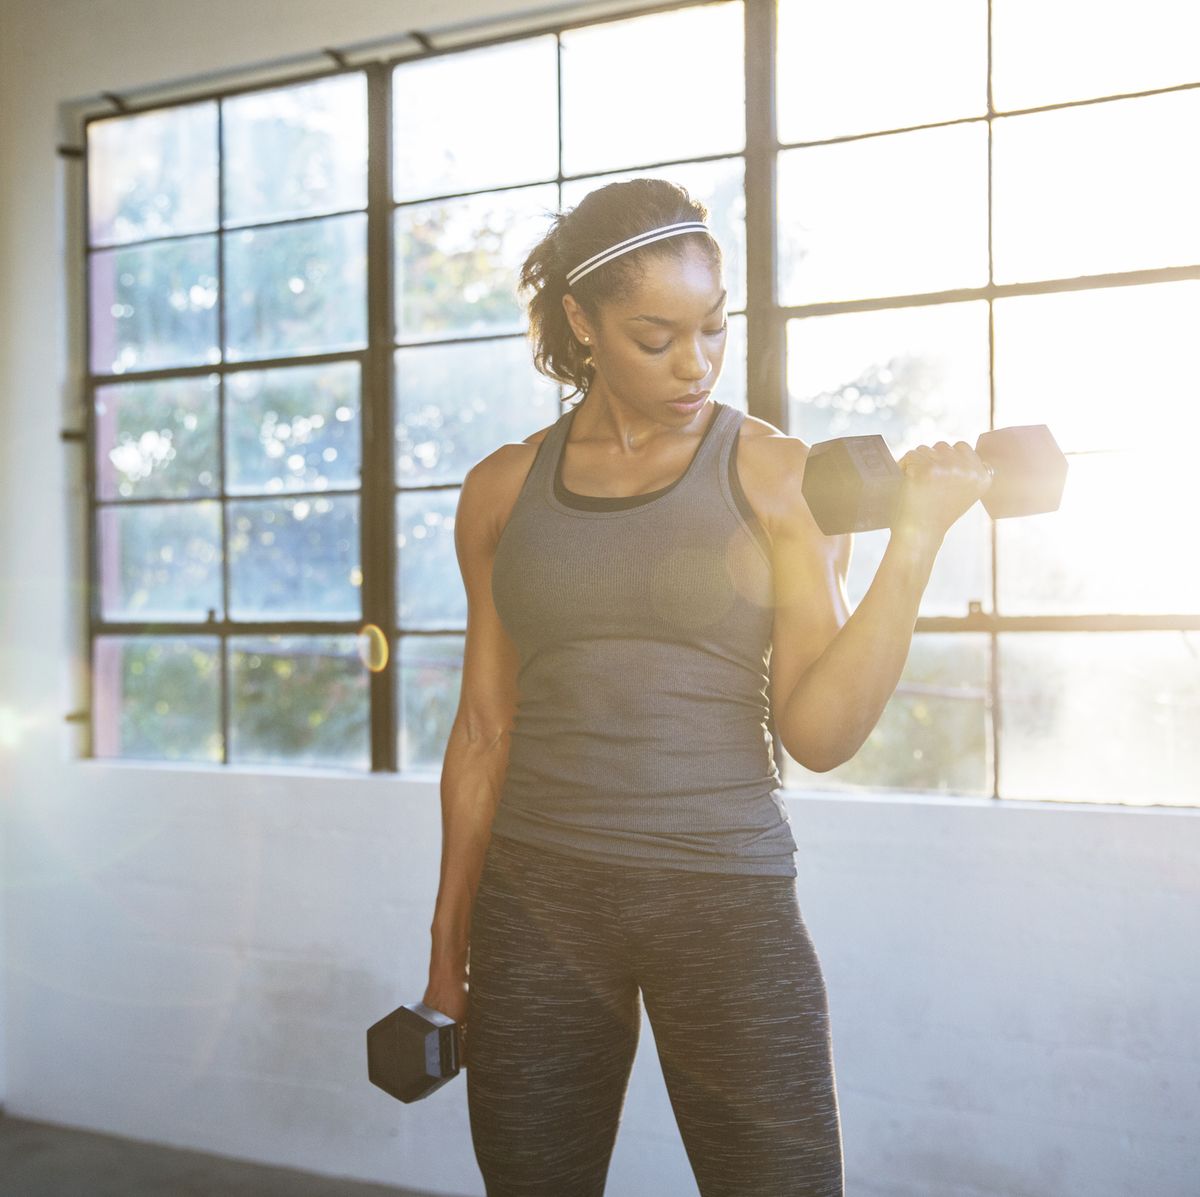 9 Best Exercise & Nutrition Tips for Women in Their 40s